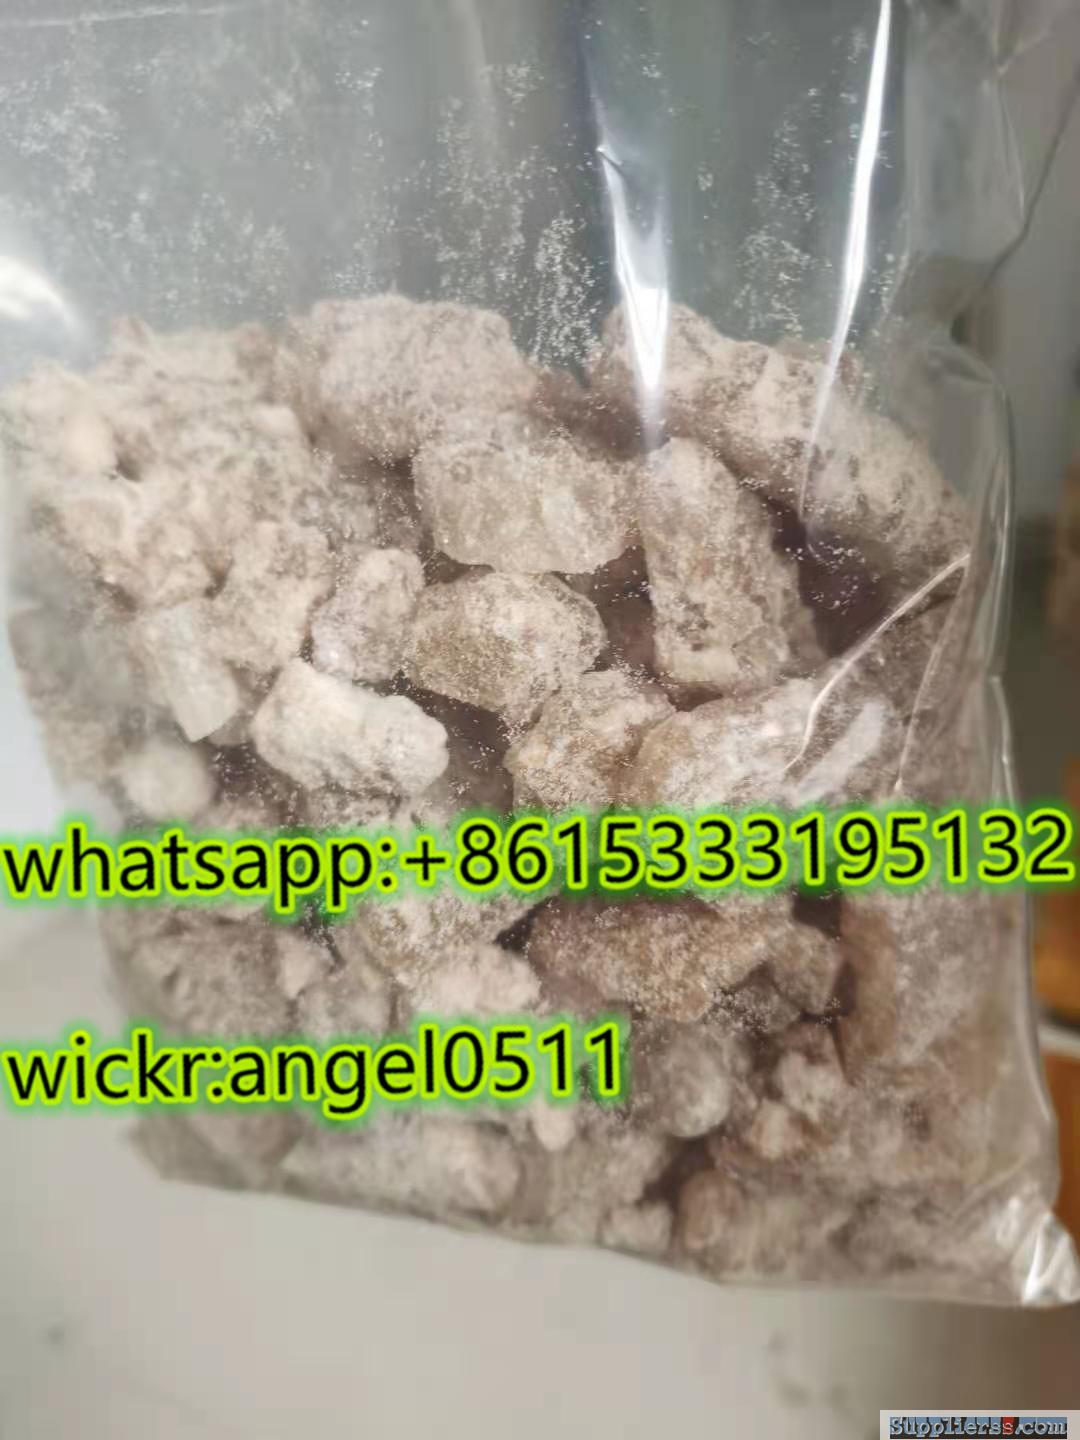 MFPEP crystal brown color strong effect MFPEP sale(wickr:angel0511)